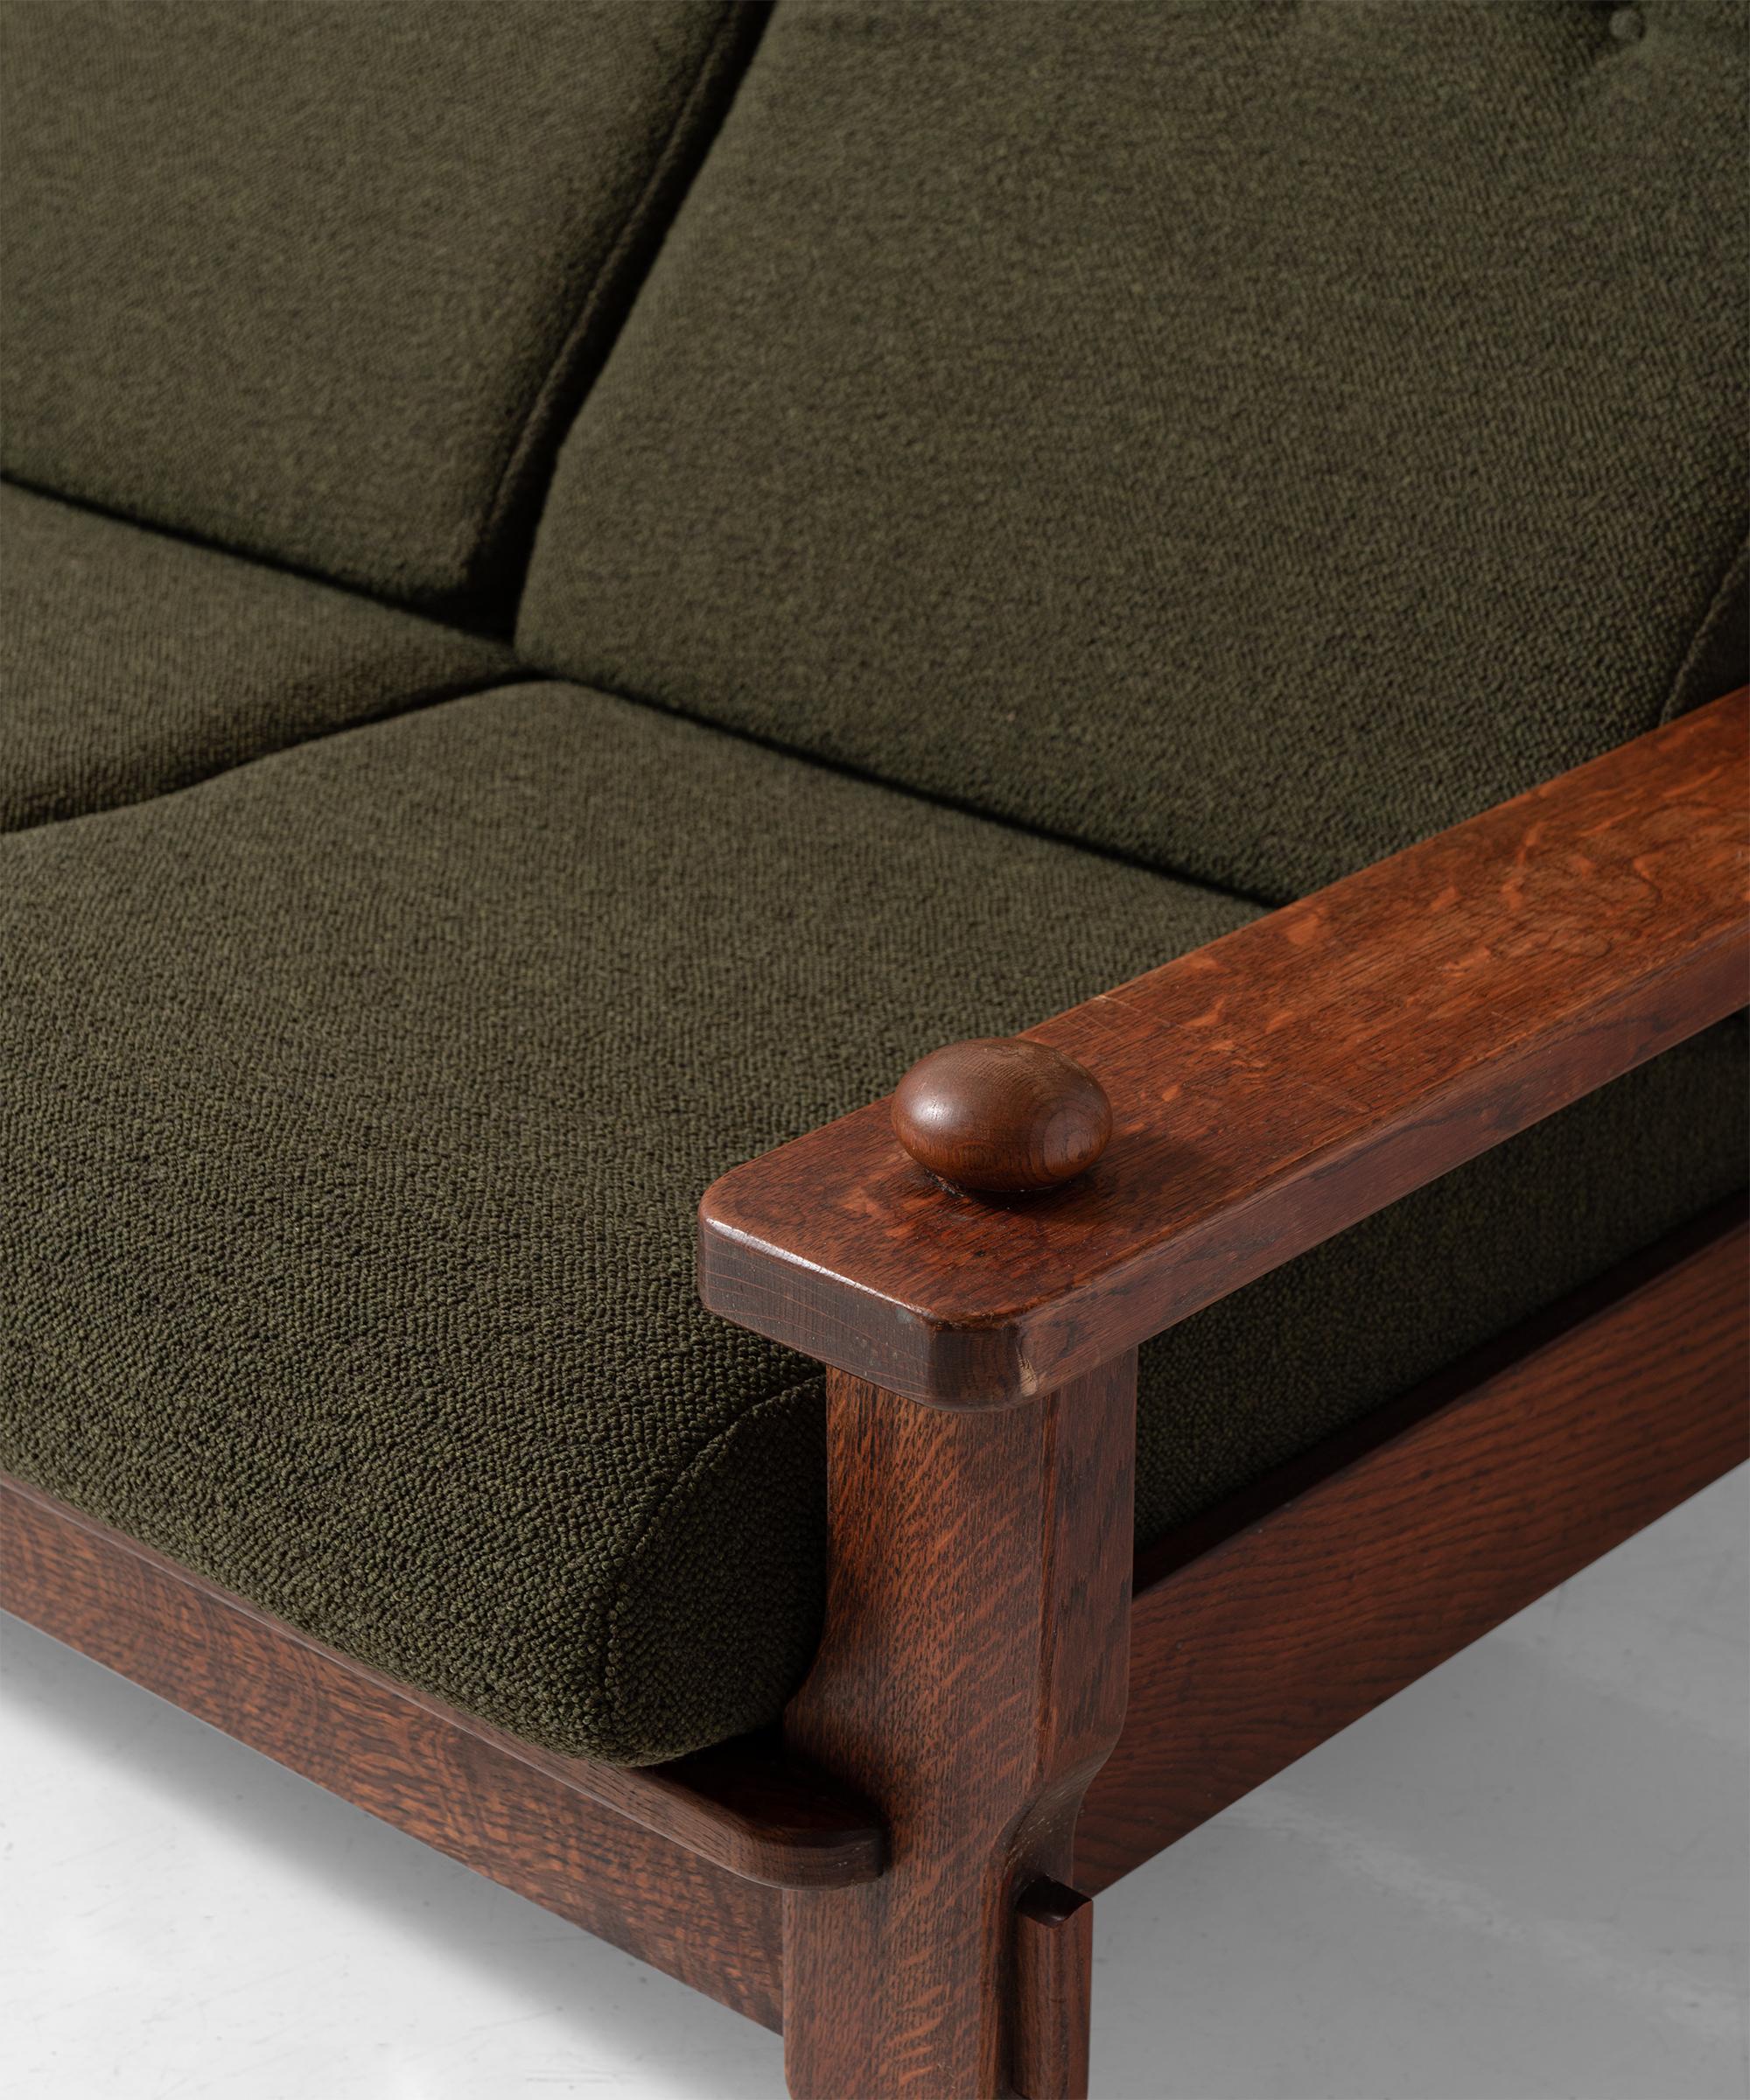 20th Century Brutalist Oak Sofa in Textured Wool Blend from Maharam, France, circa 1950